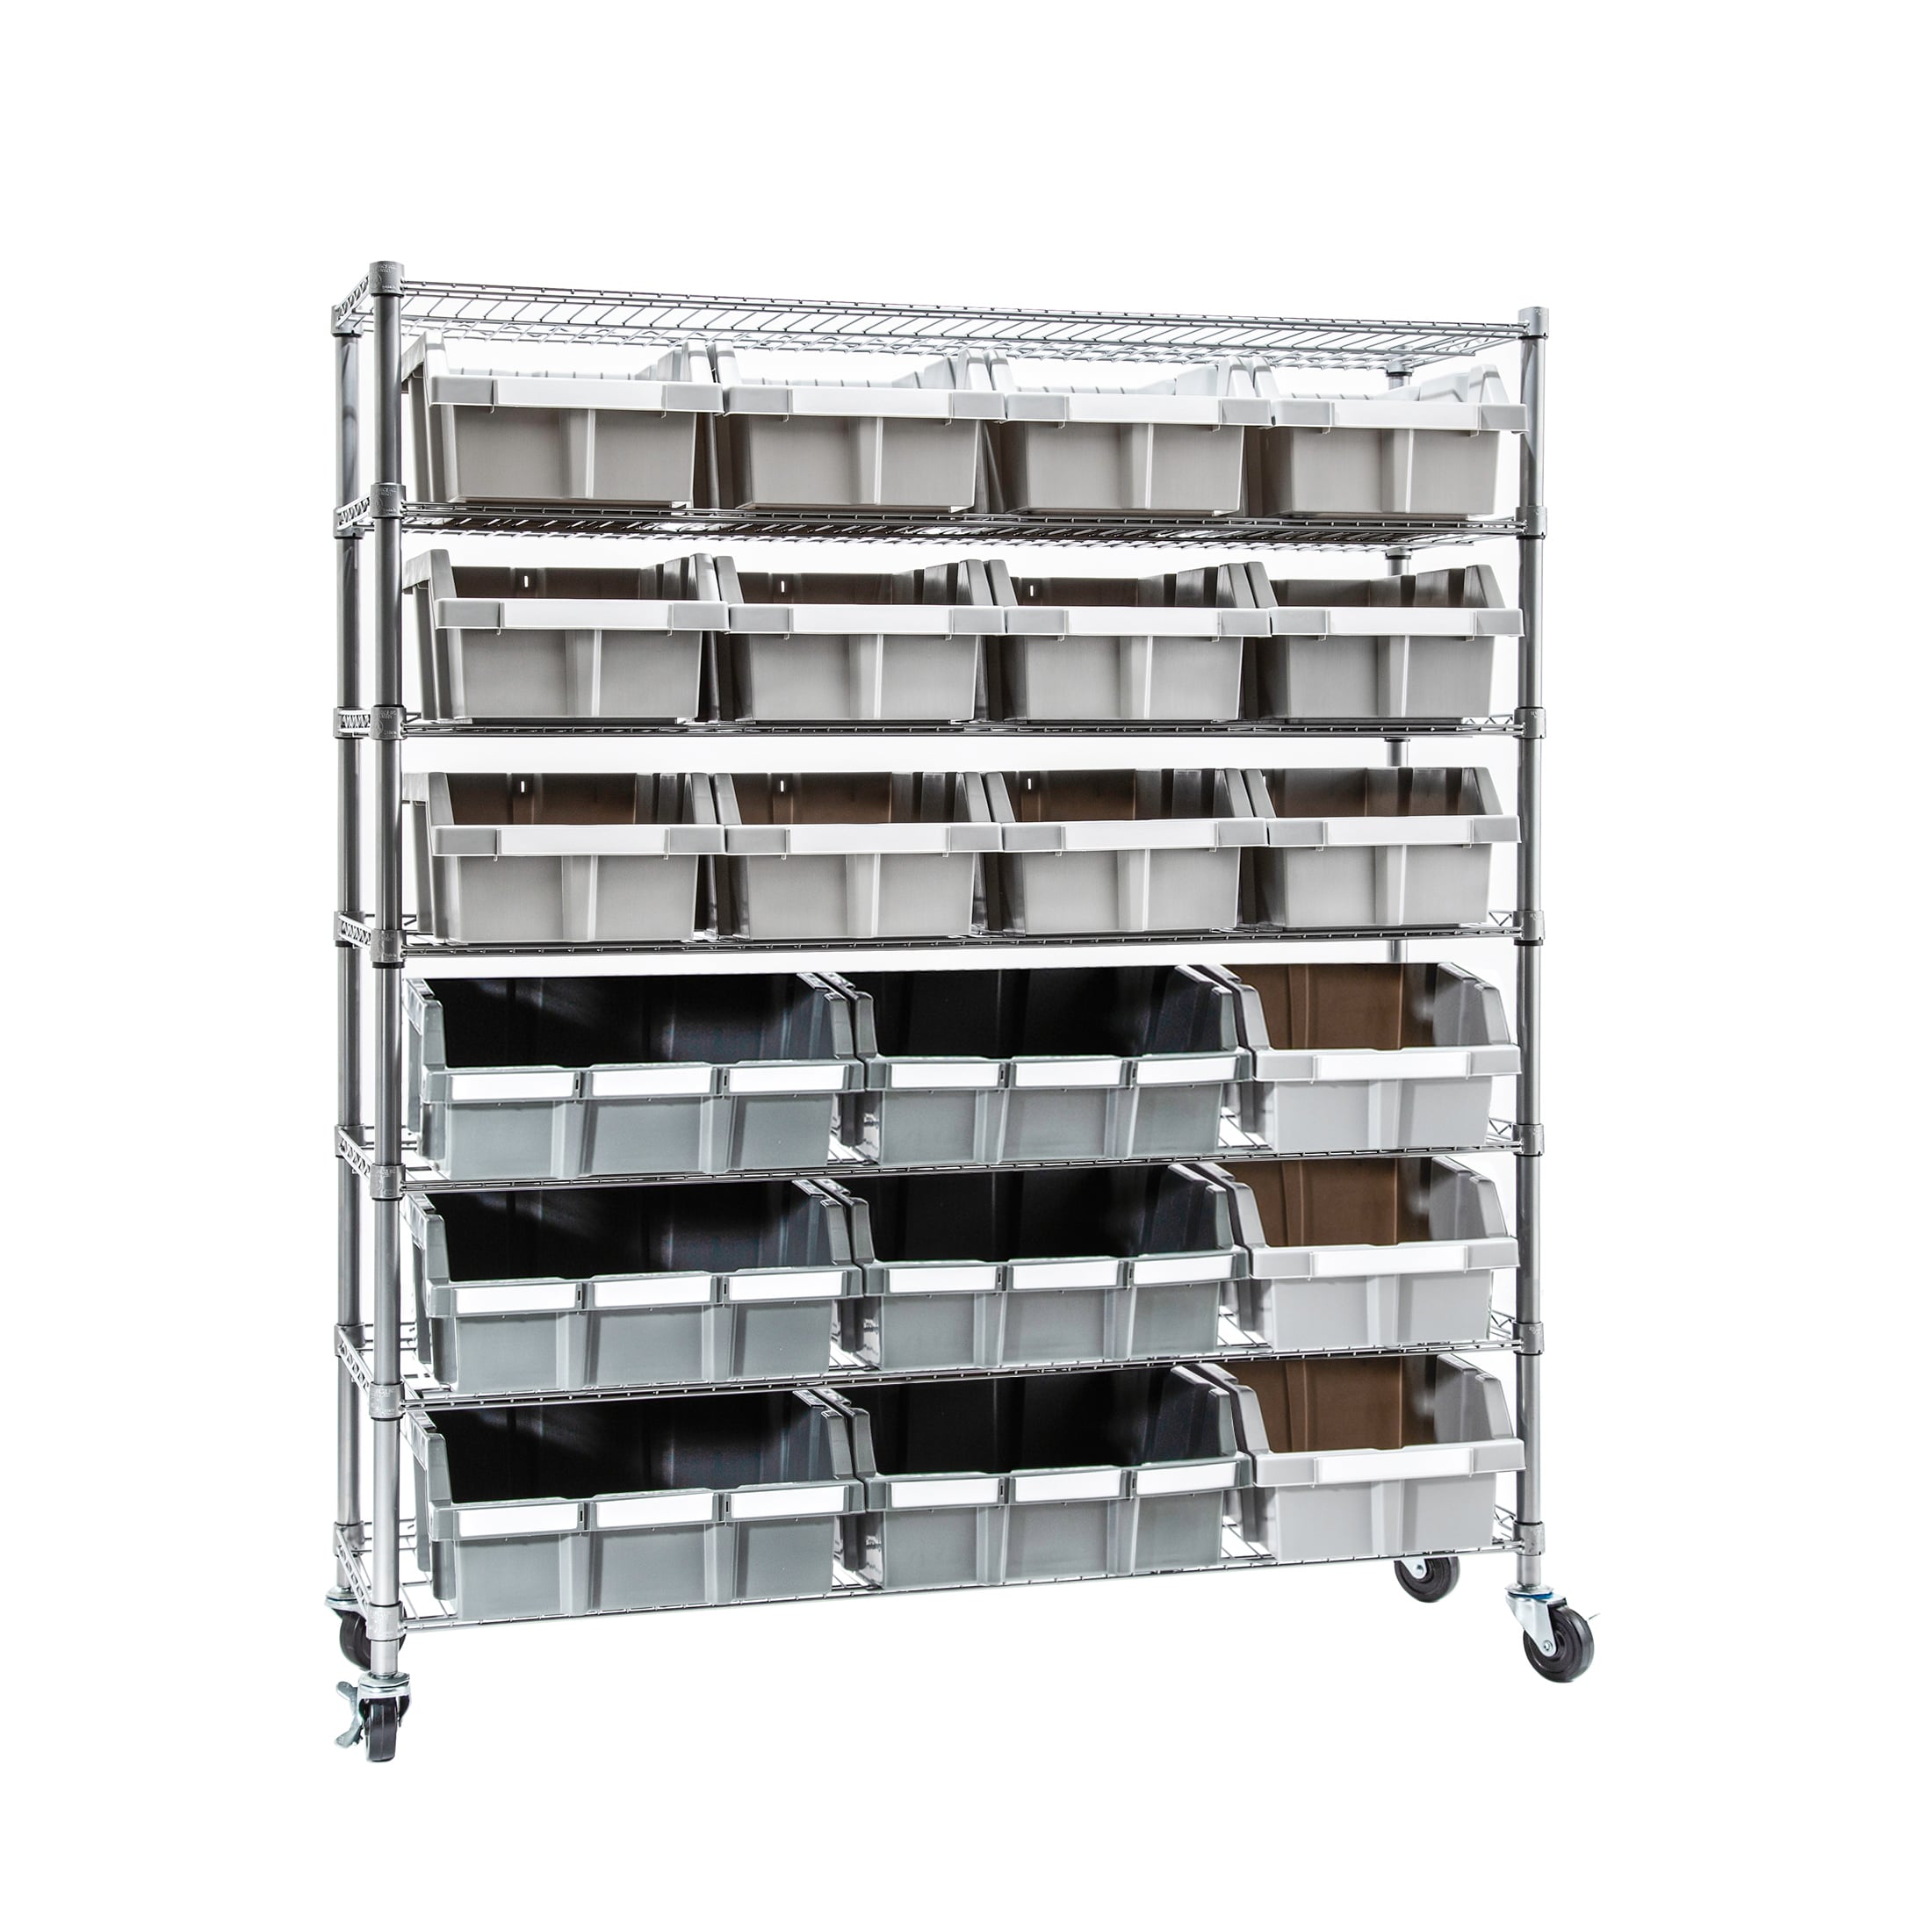 Seville Classics Steel Heavy Duty 7-Tier Utility Shelving Unit (36-in W x  14-in D x 56-in H), Chrome in the Freestanding Shelving Units department at